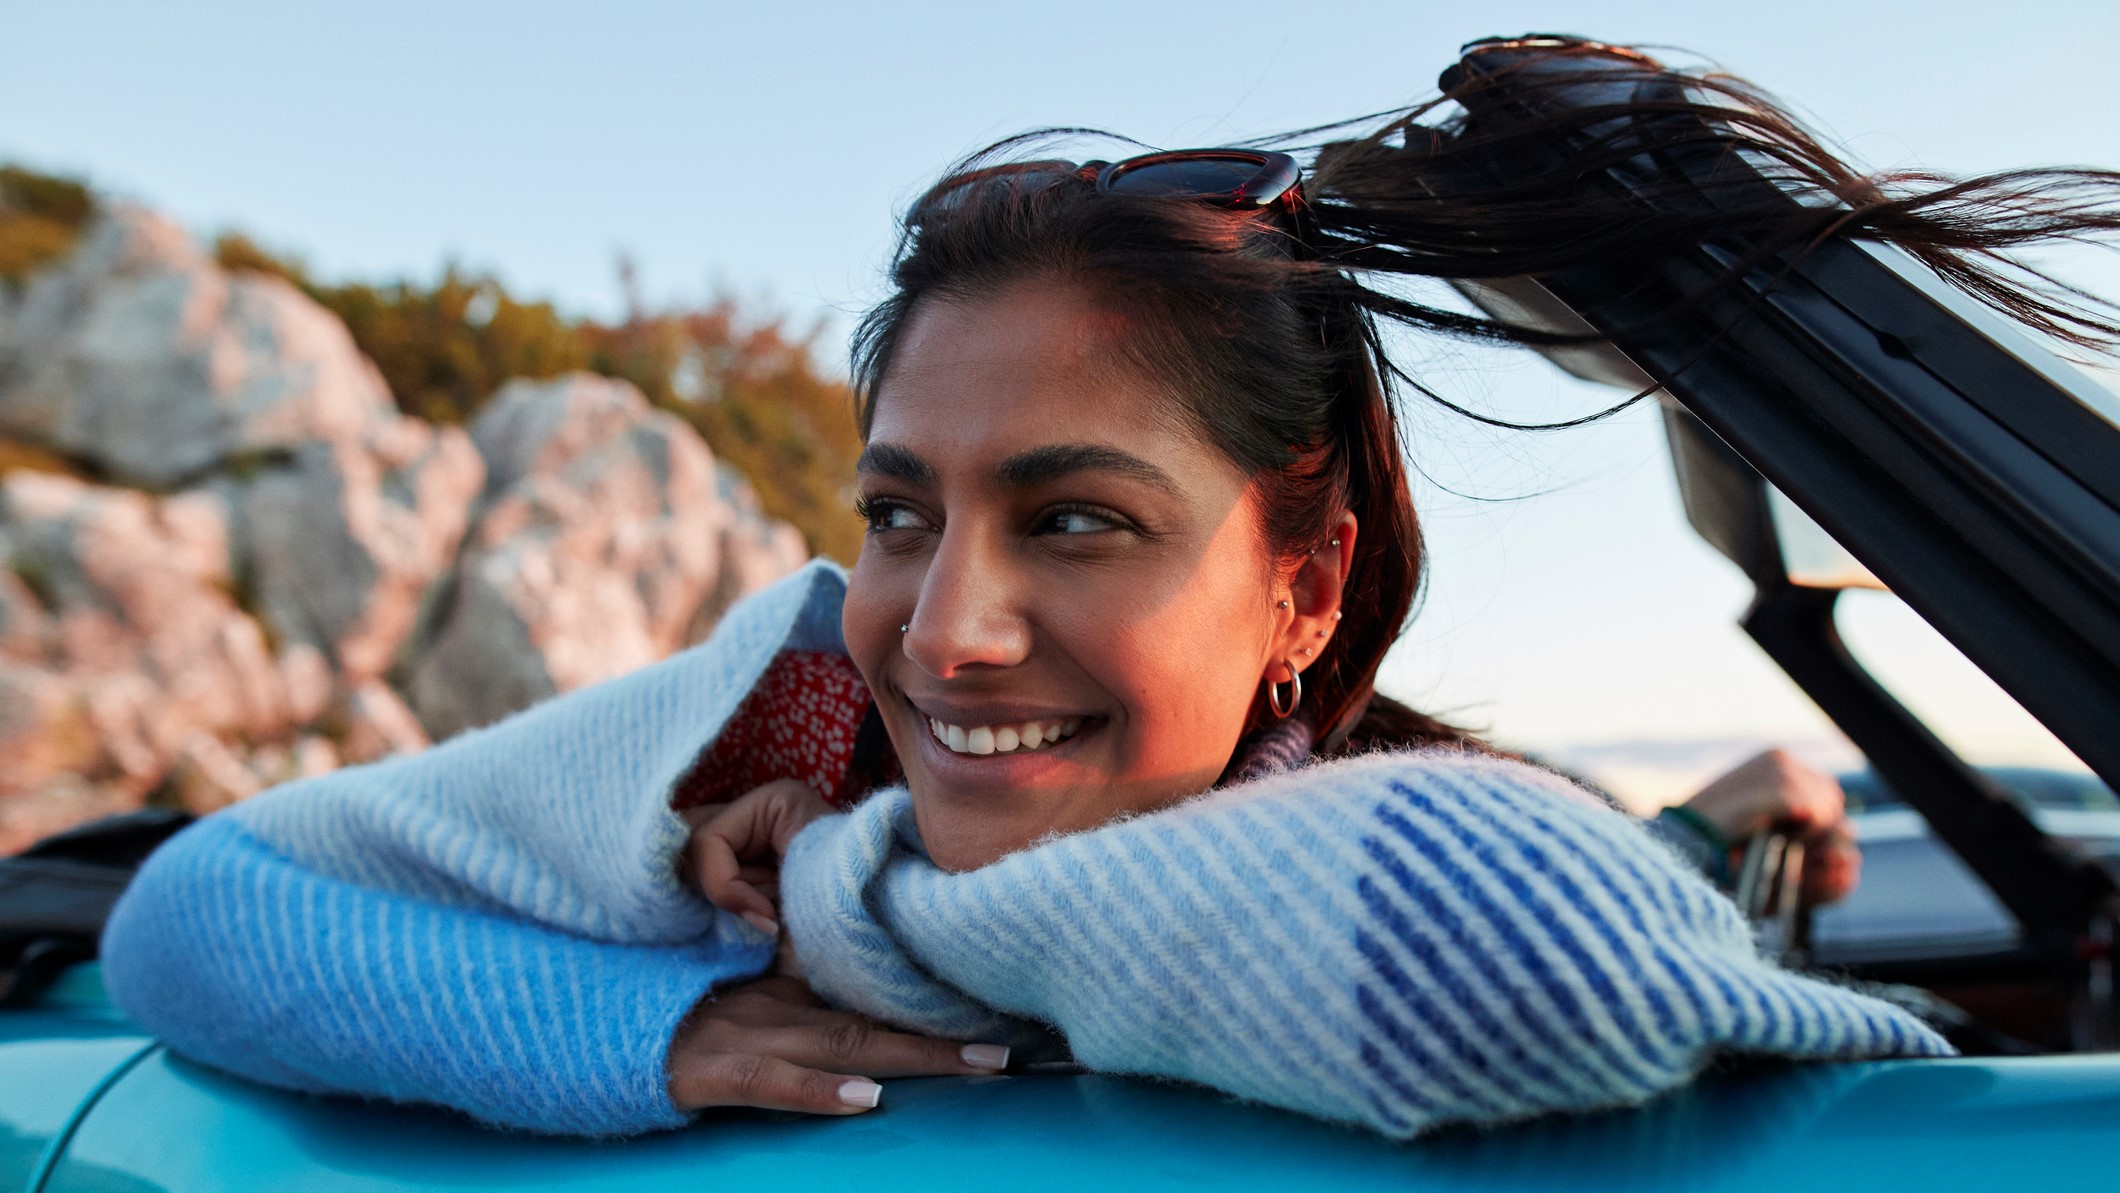 Smiling young woman day dreaming while leaning on convertible car during road trip